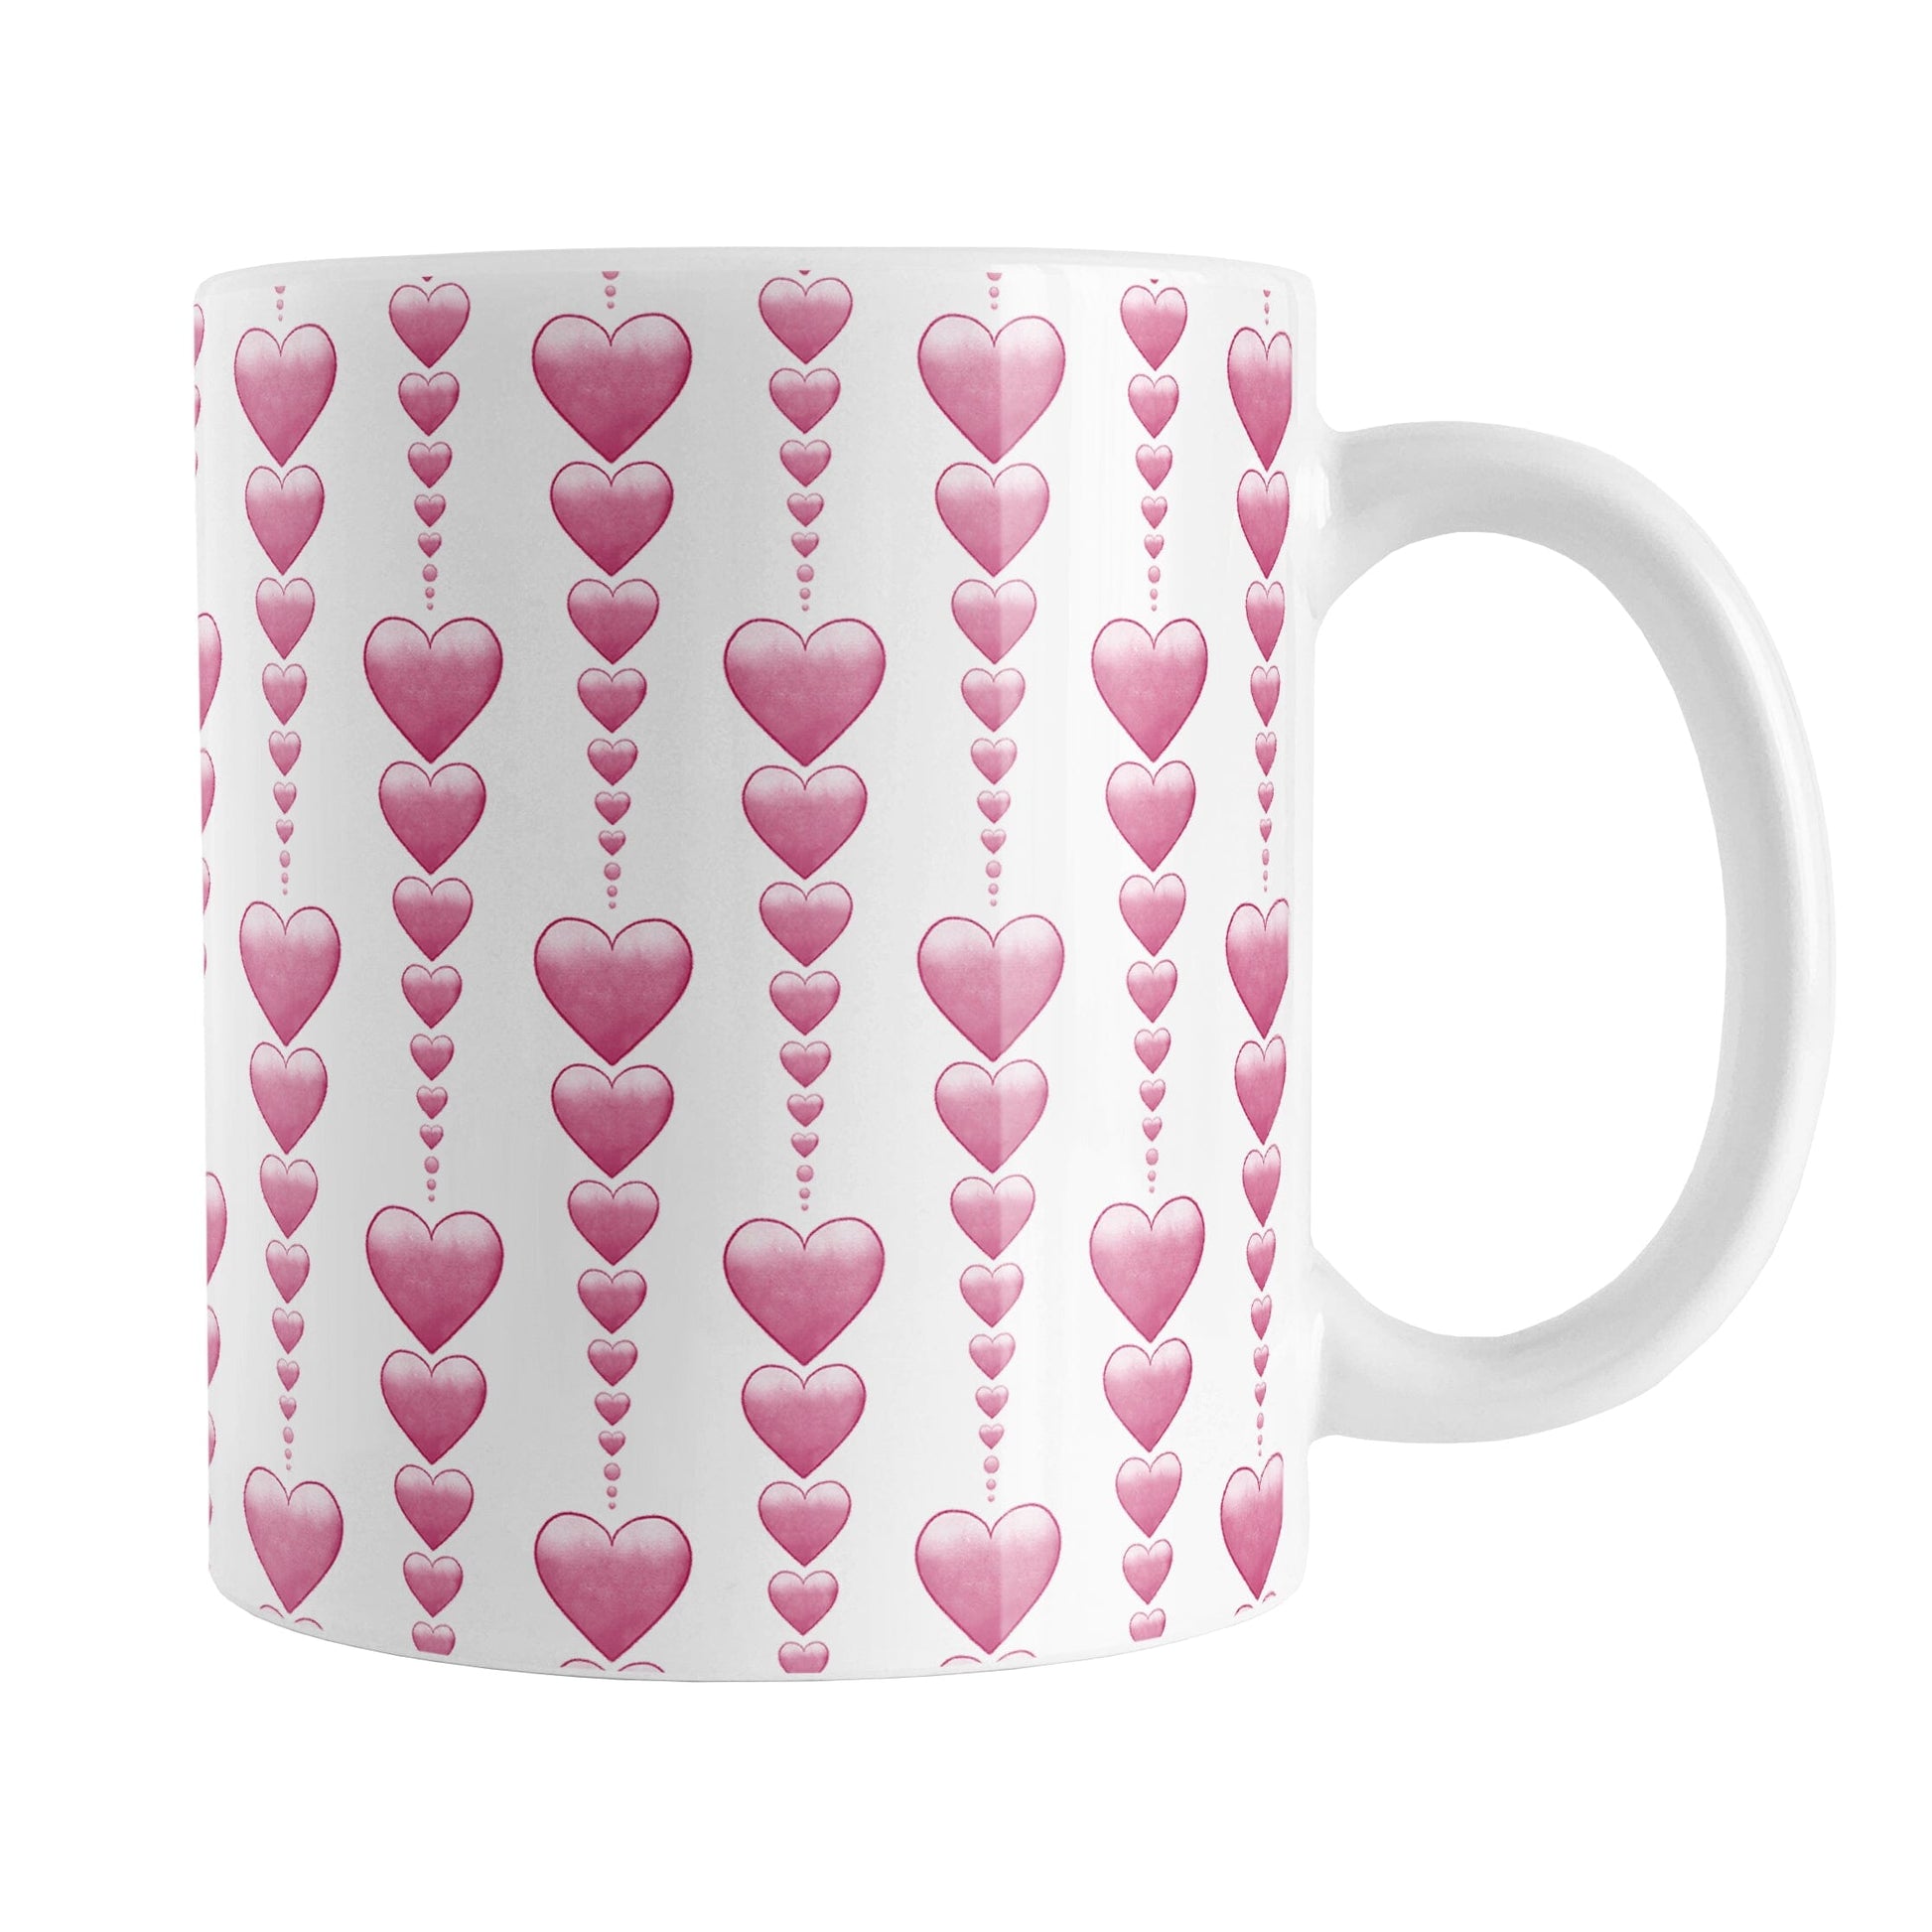 Heart Strings Mug (11oz) at Amy's Coffee Mugs. A ceramic coffee mug designed with strings of hearts descending in size in a pattern that wraps around the mug to the handle.